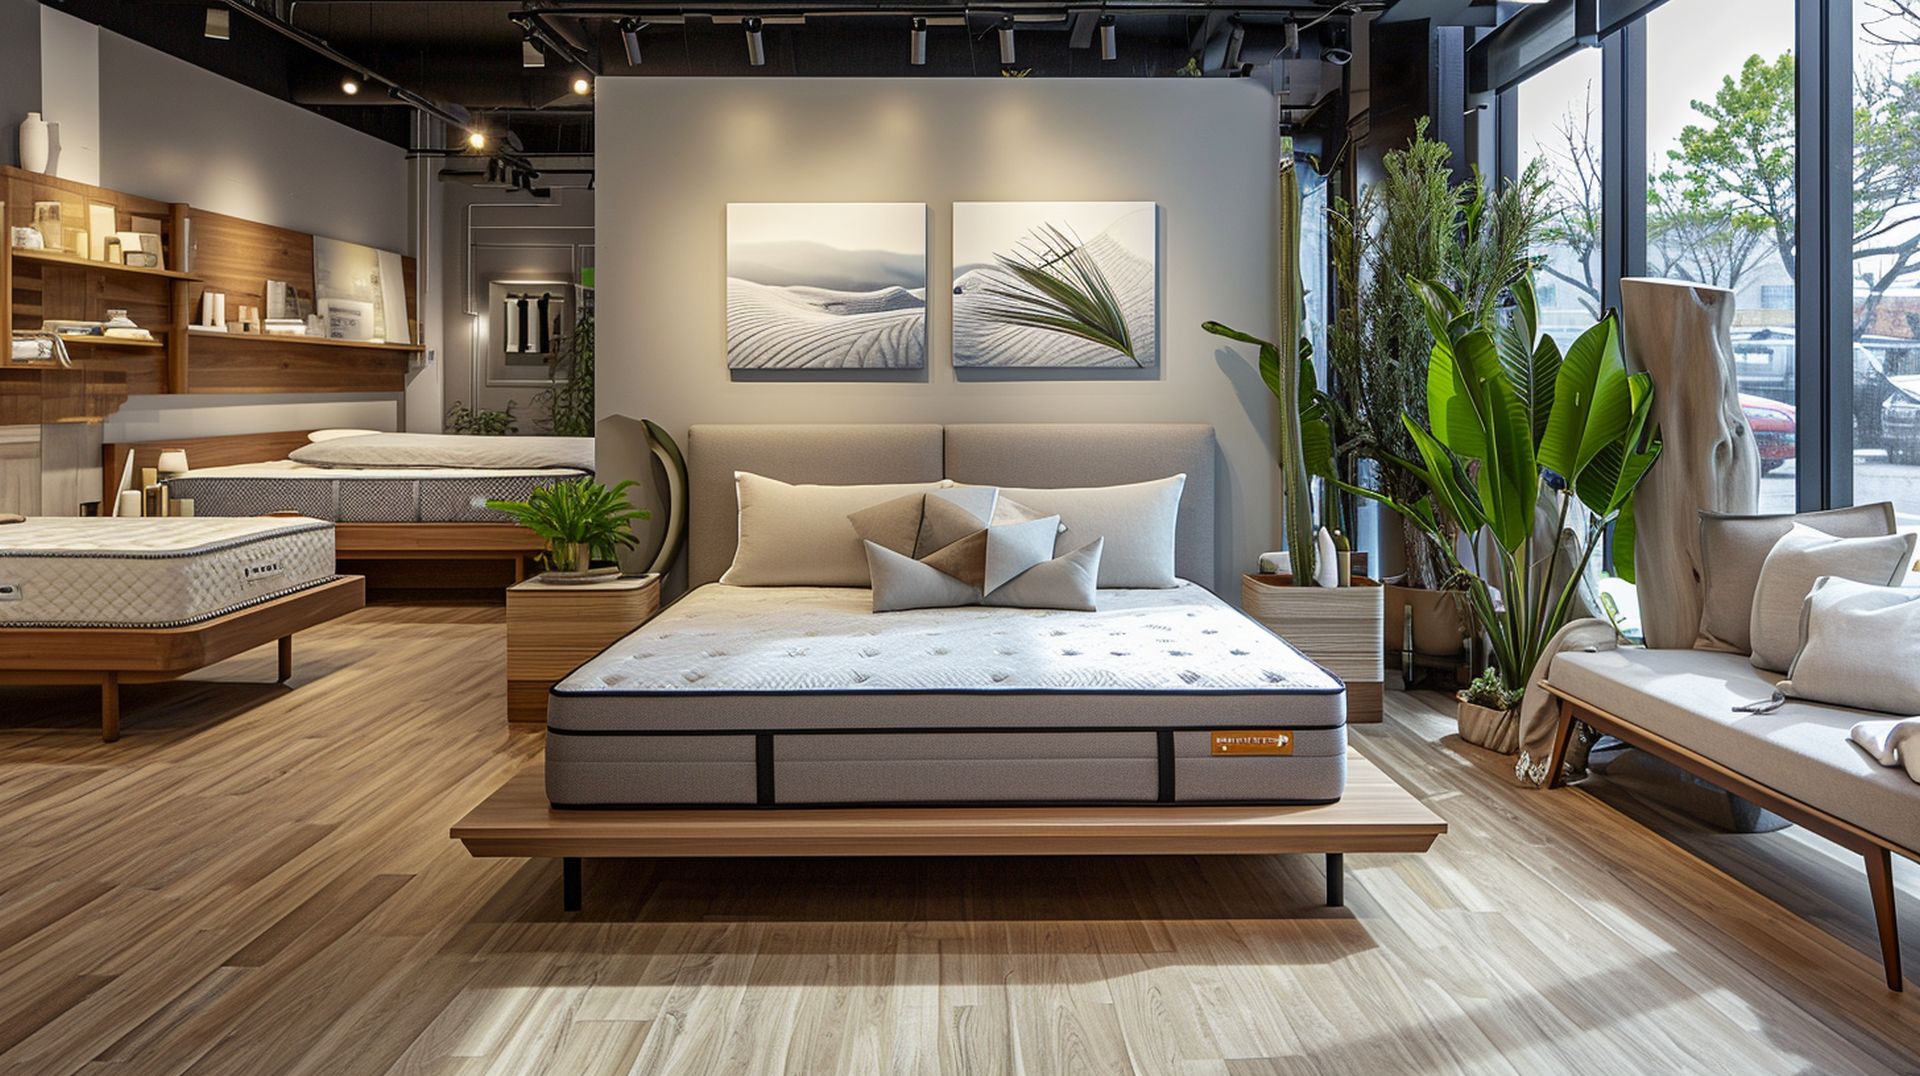 If you're looking for a new bed, mattress stores in Highland offer the best customer and delivery service, financing, and warranties in California